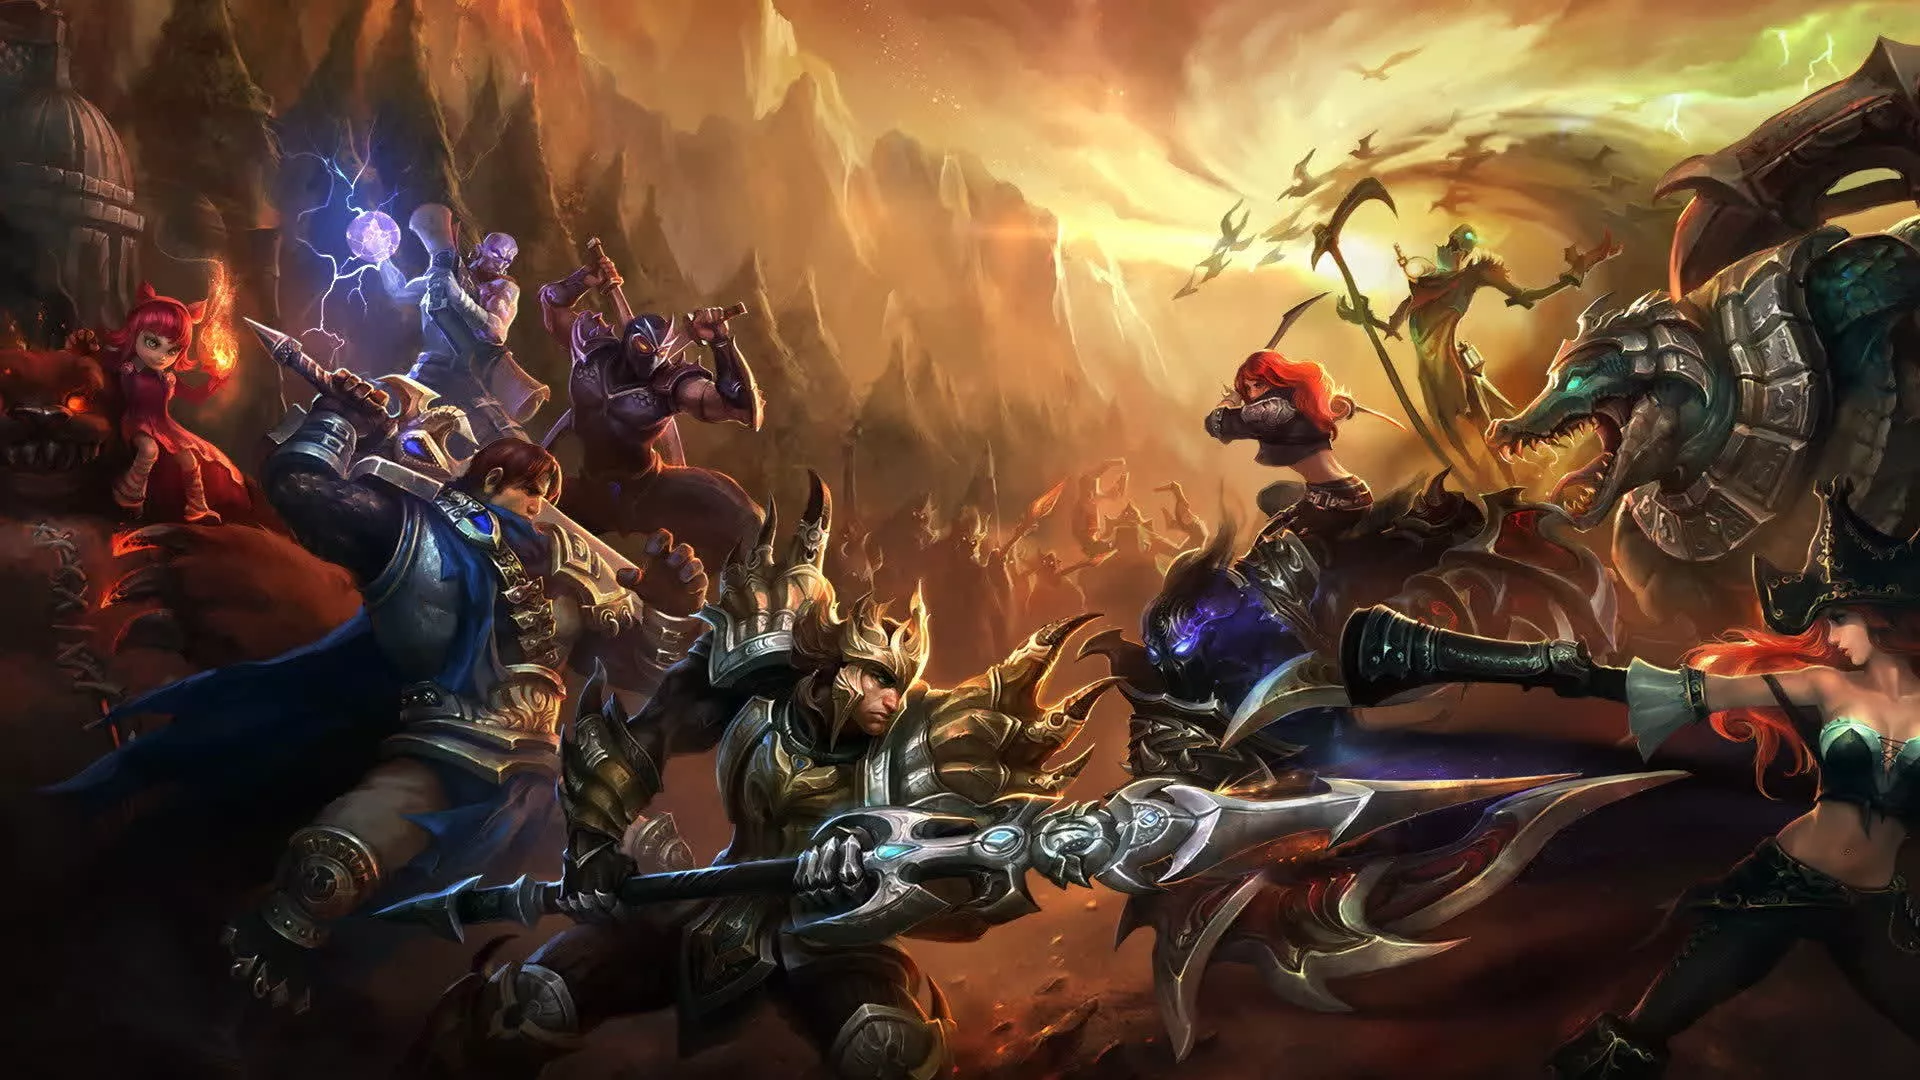 League of Legends developer Riot Games is working on an MMO